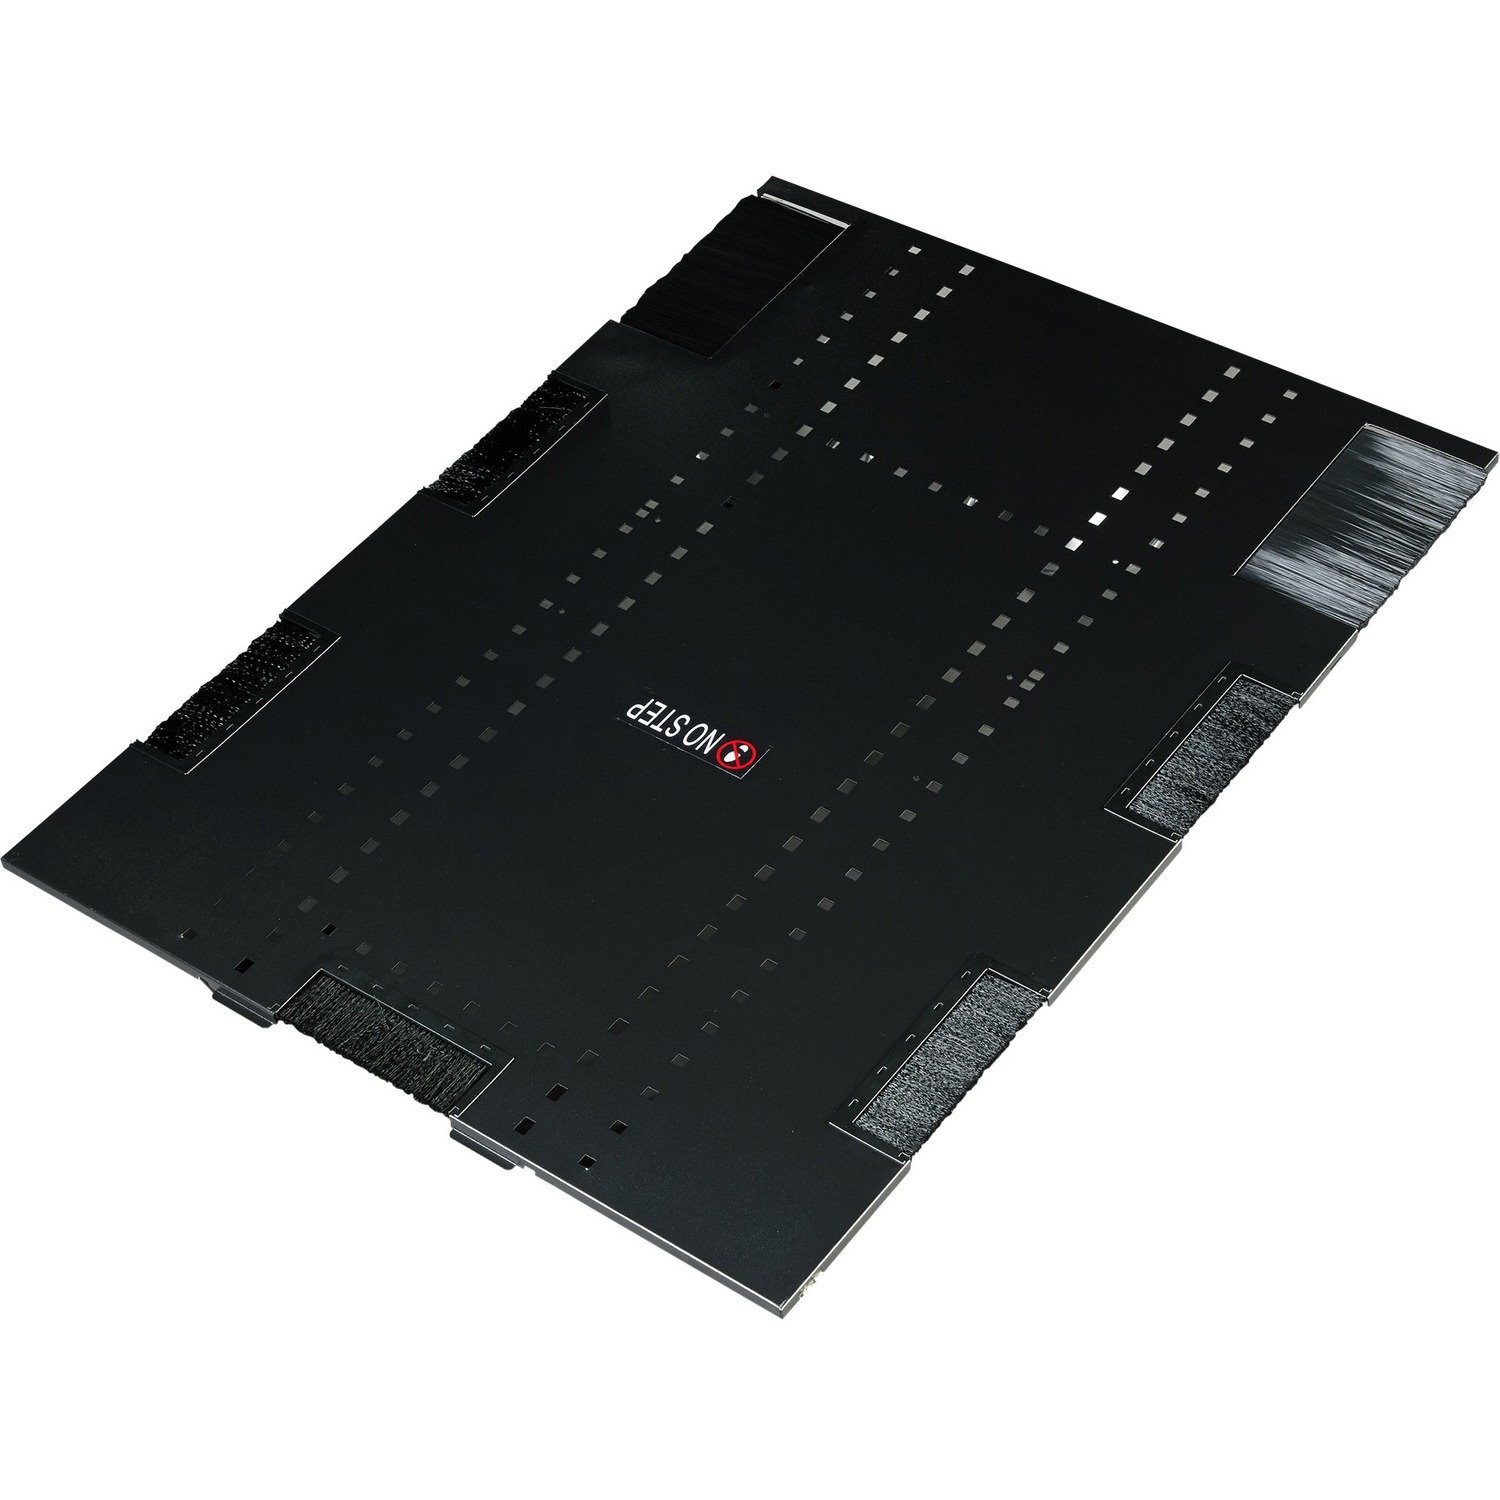 APC by Schneider Electric AR7212A Roof Panel